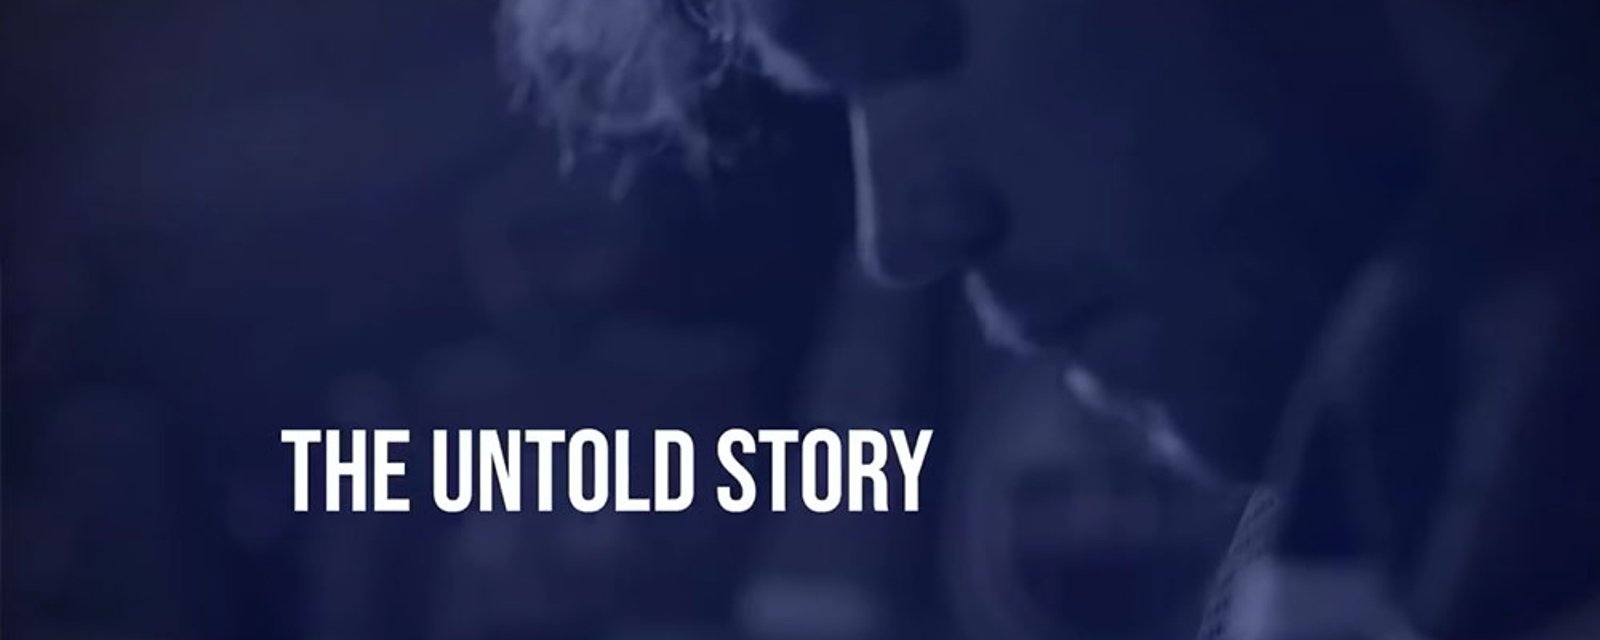 McDavid releases trailer for upcoming documentary